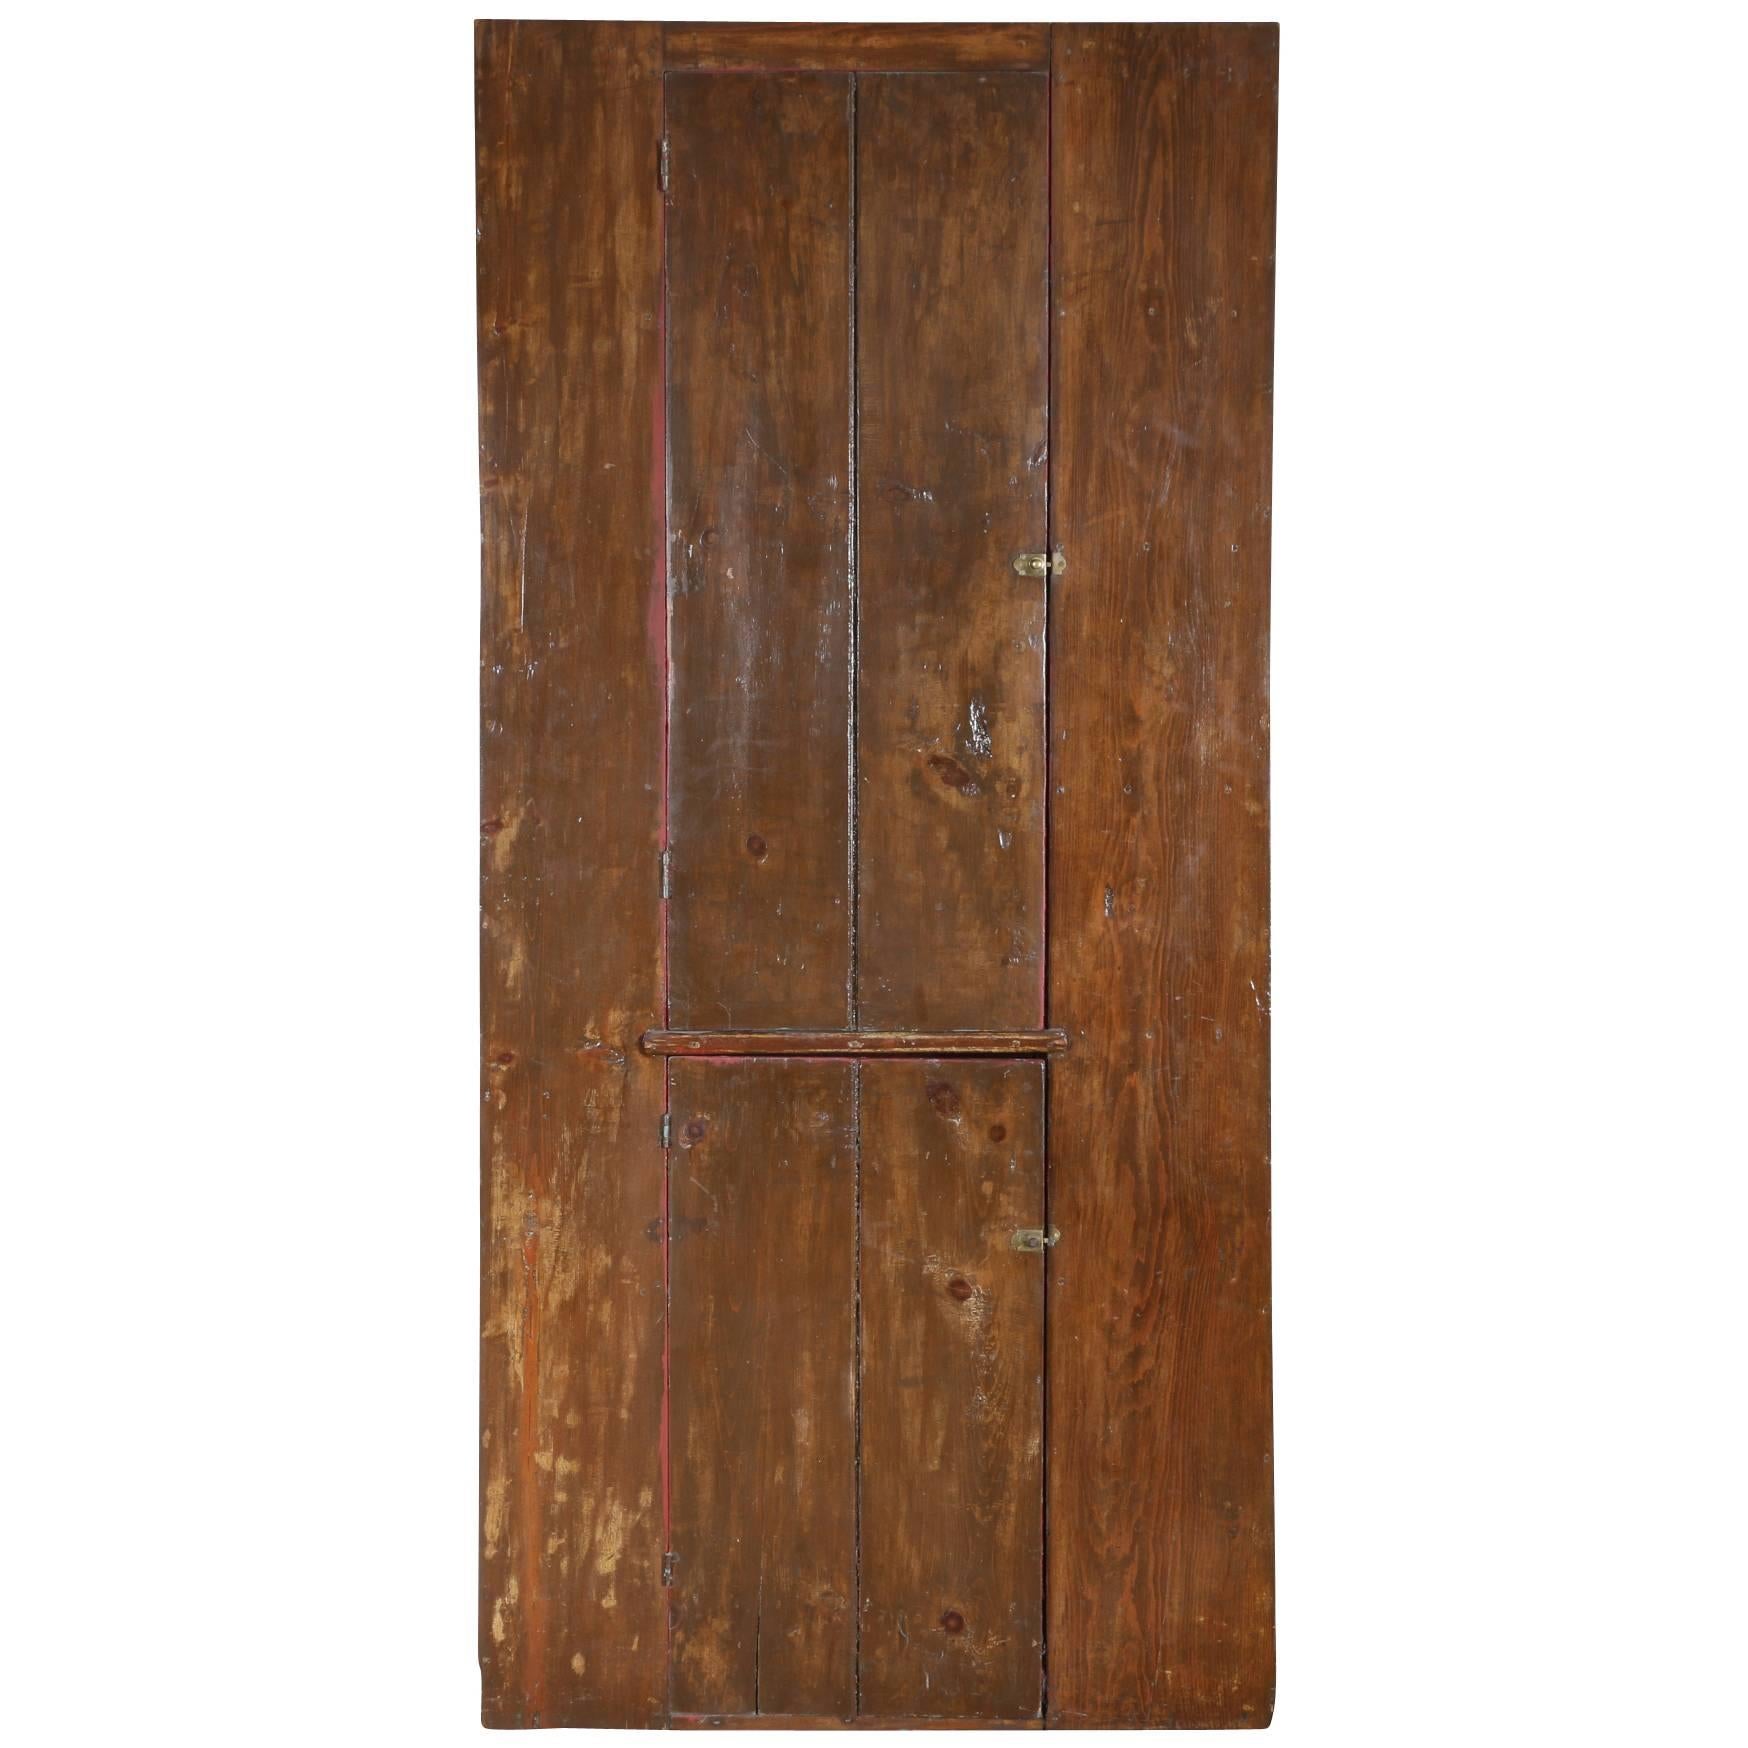 19th Century American Painted Pine Cupboard